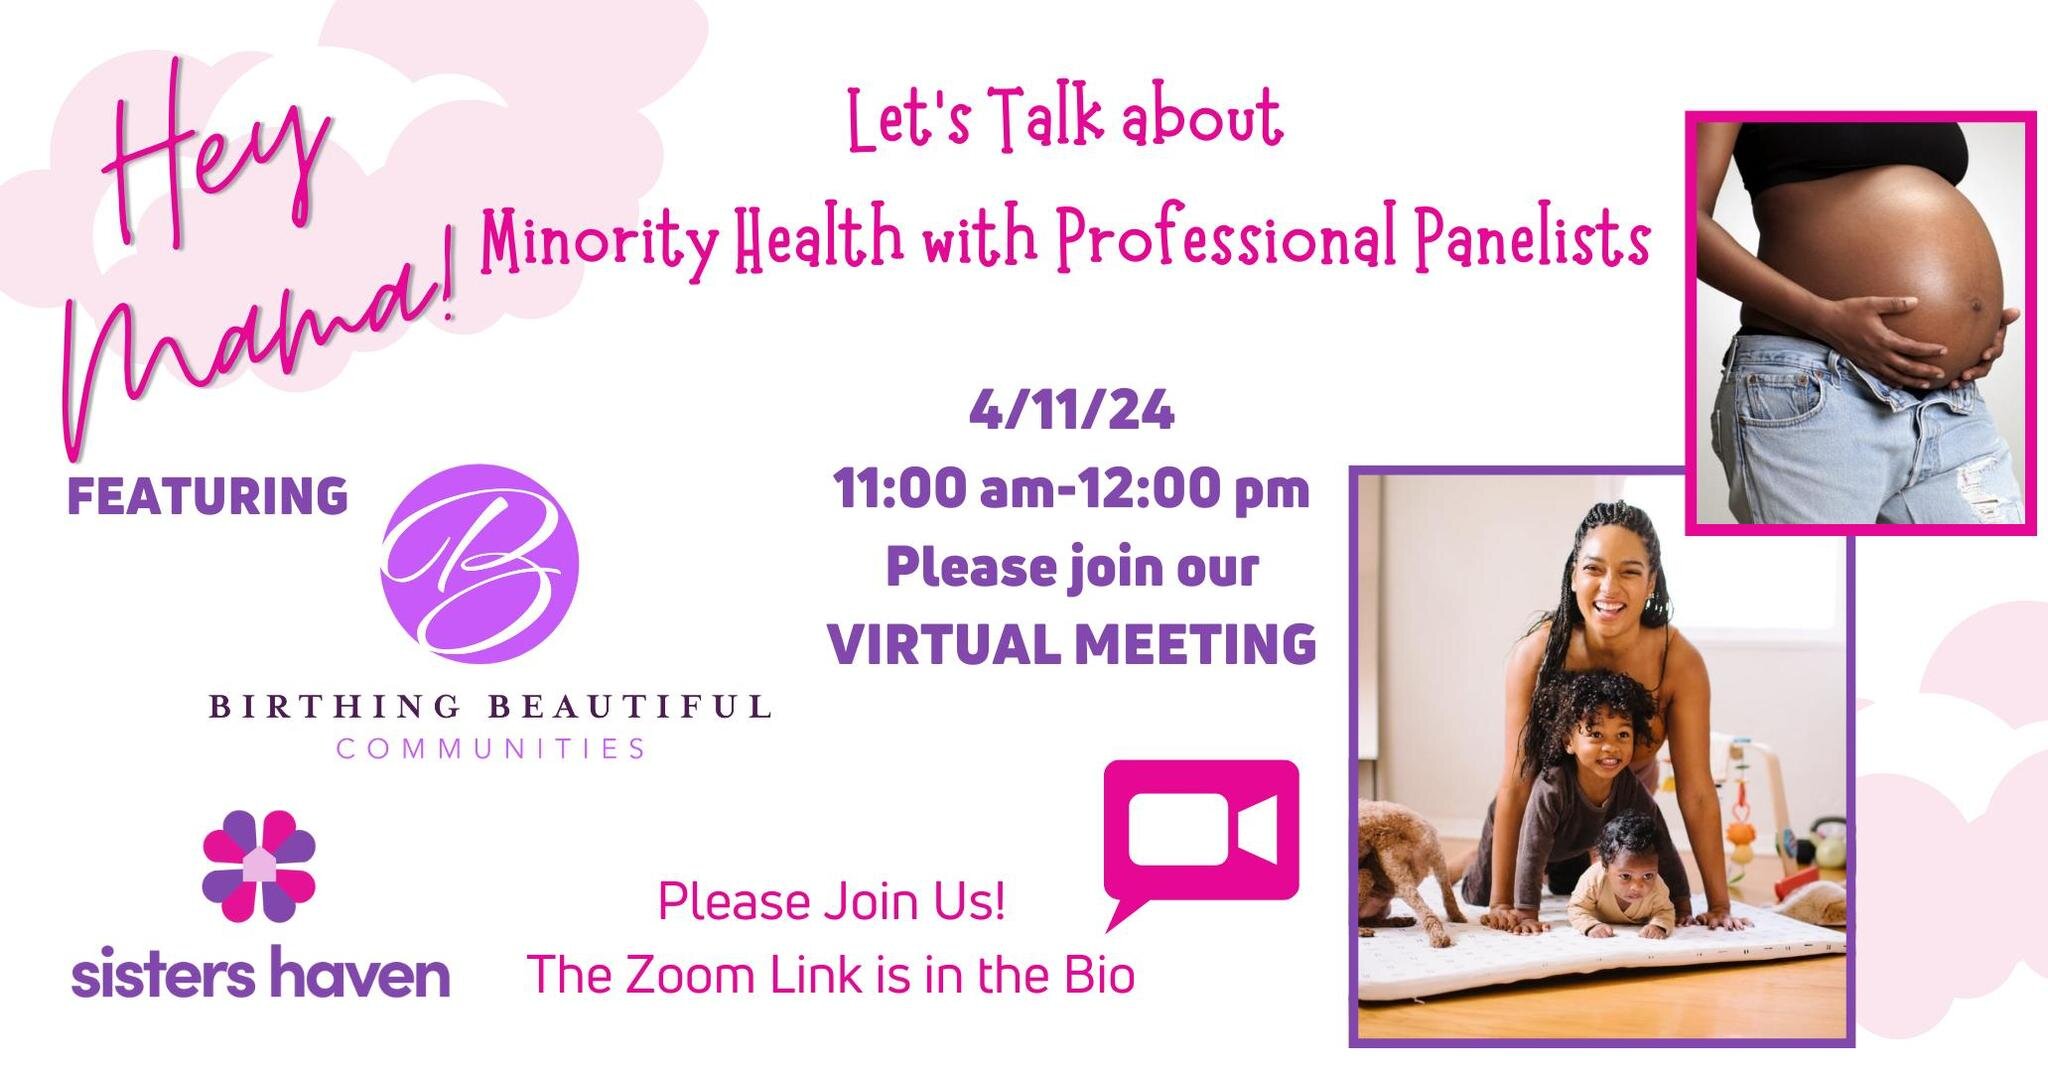 Zoom Link: https://us06web.zoom.us/j/81640923414?pwd=5ZW6gMCGC6YkTRaBA61Ynz7Po1PenU.1
Hey Mama! This is Minority Health Week!

Join us for an engaging online event where we will discuss important topics surrounding minorities, maternal health, and th